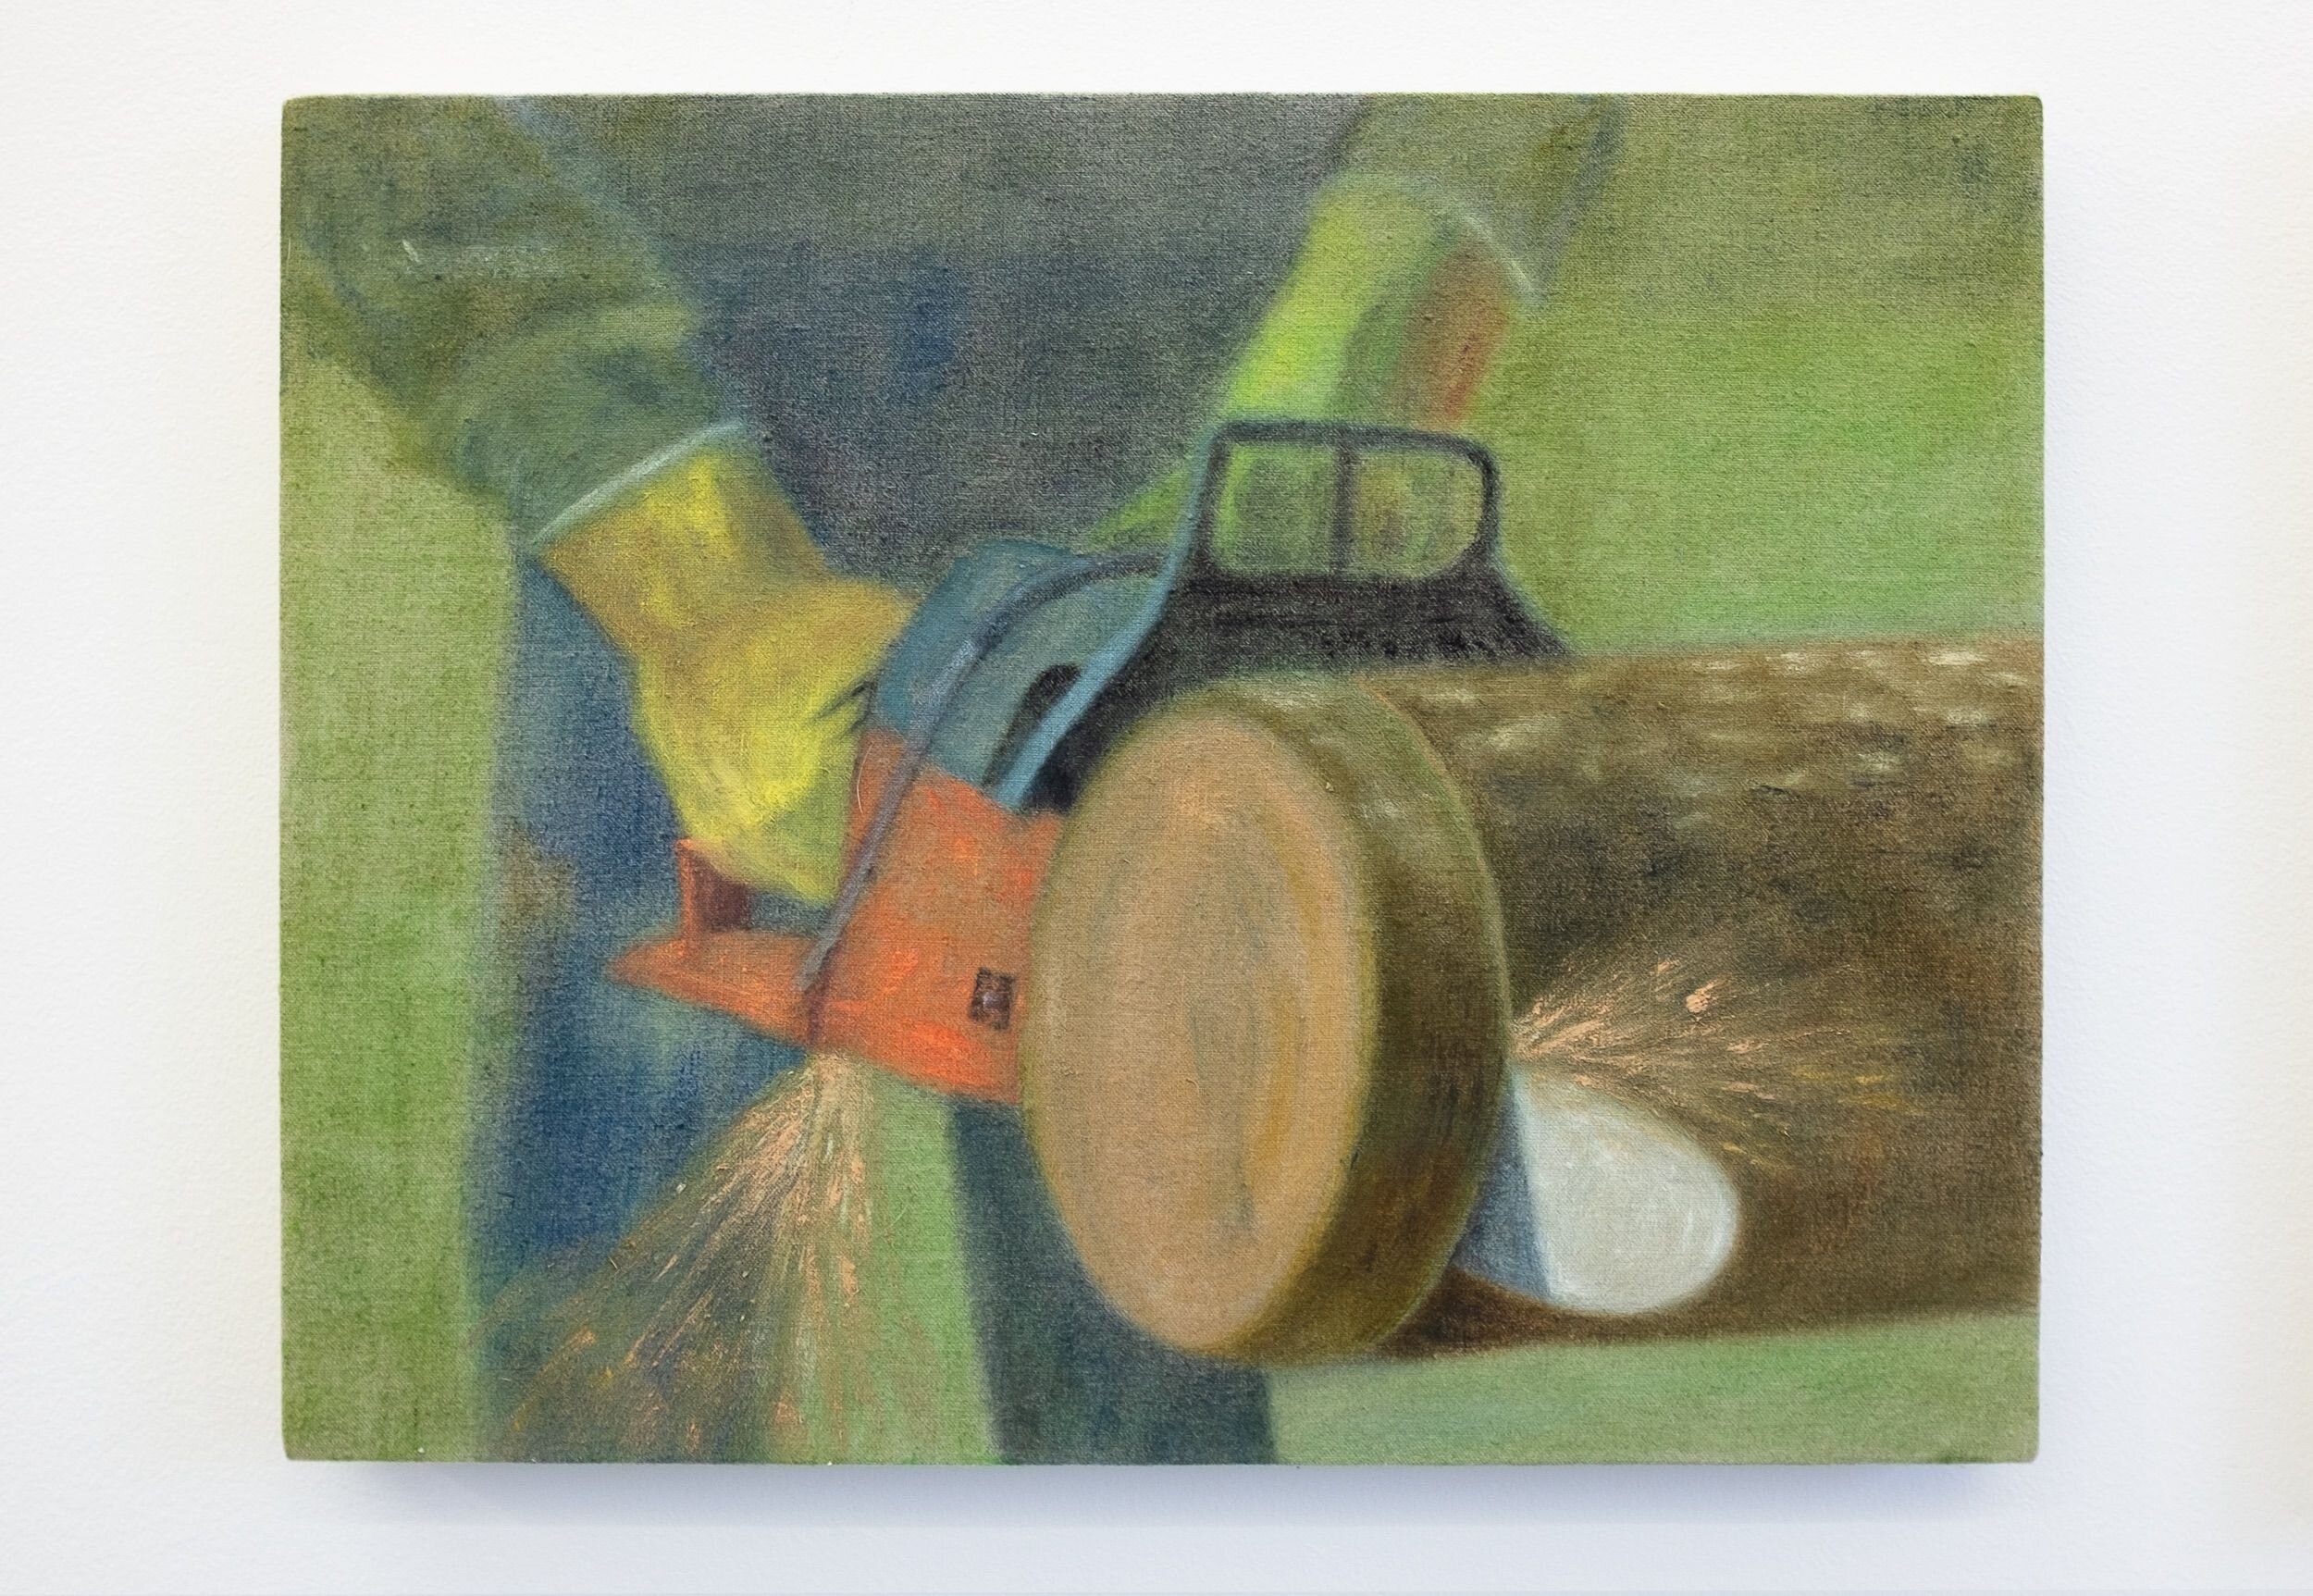  Katelyn Eichwald  Chainsaw , 2020 Oil on linen 18 x 14 inches 